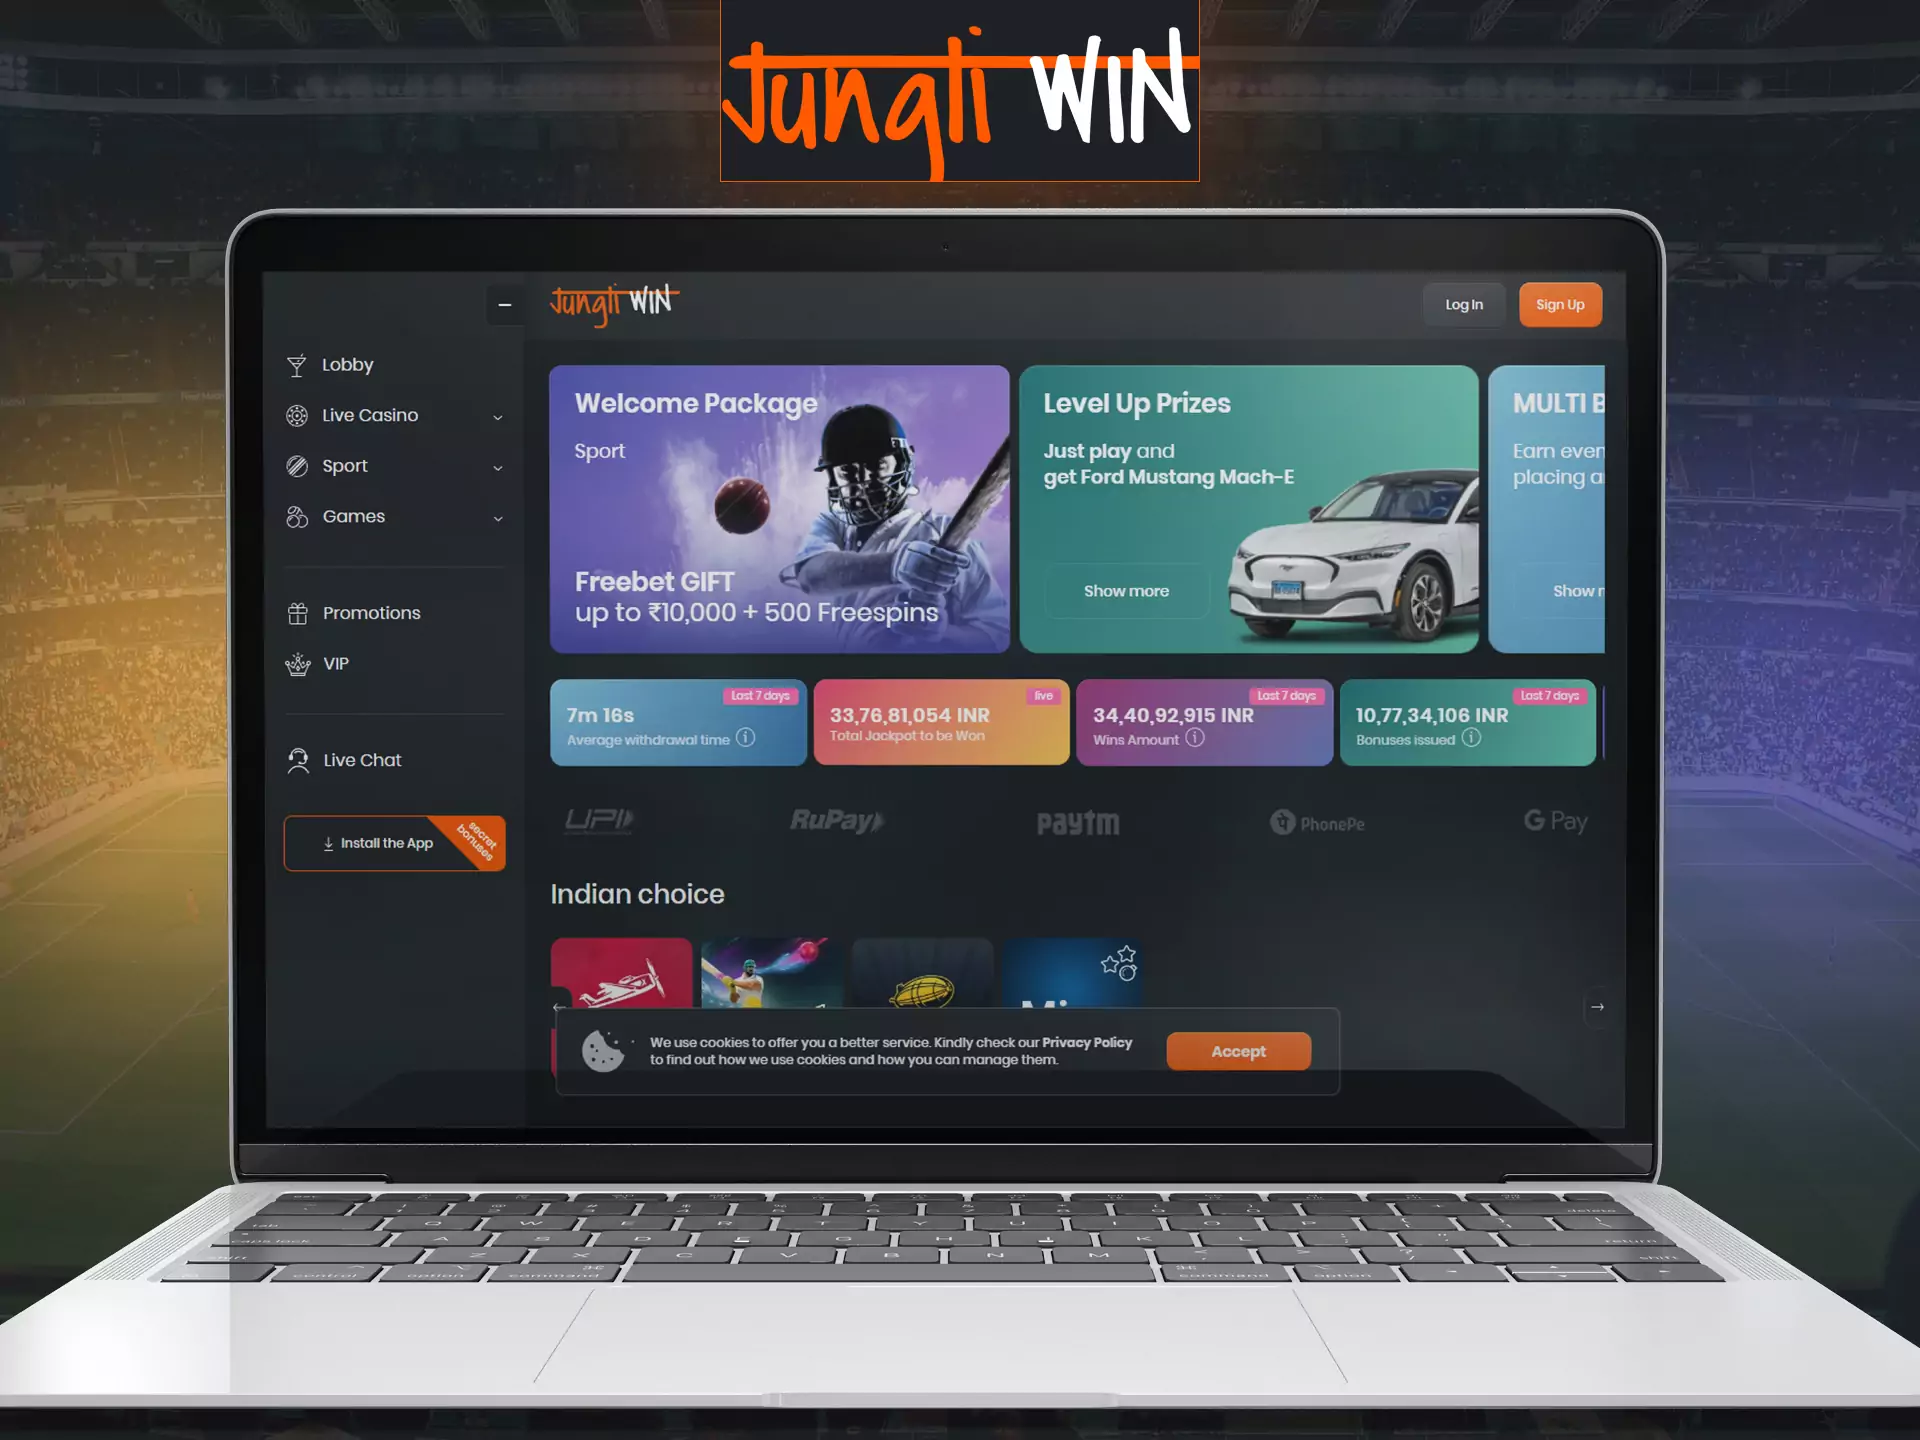 On the official website of Jungliwin, you can place bets and play at the casino, get bonuses.